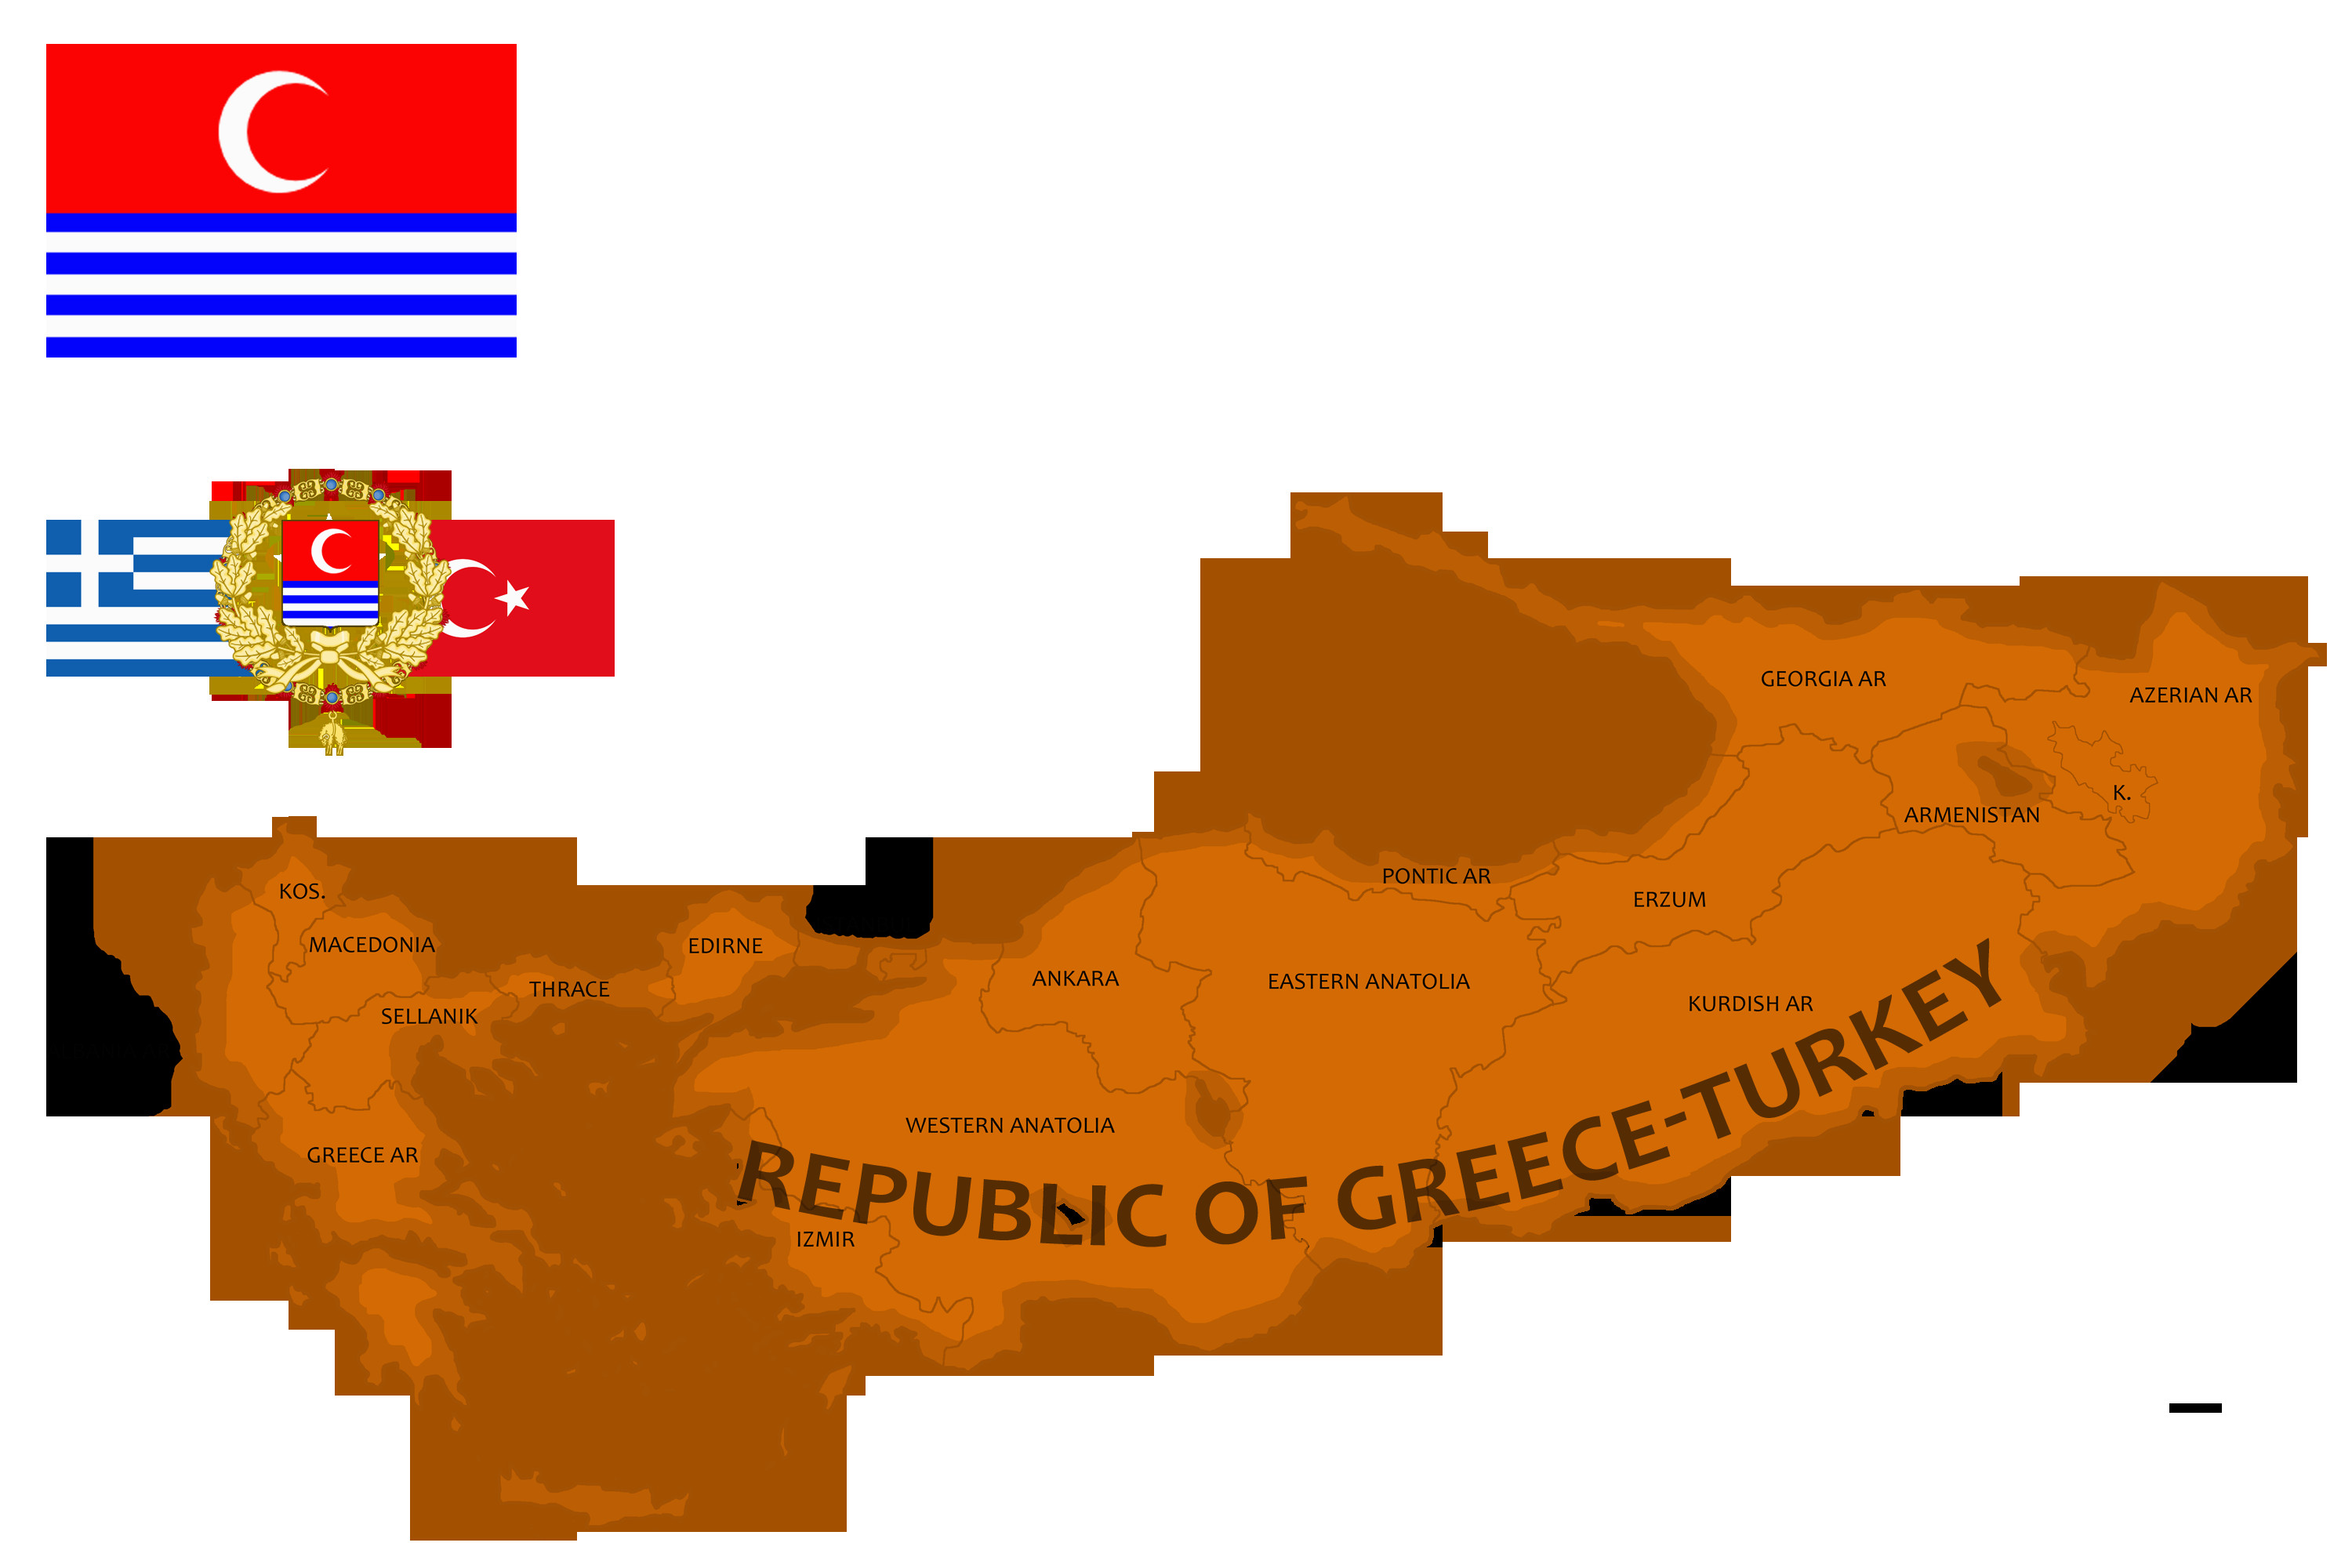 map of turkey and greece inspirational map turkey and greece state